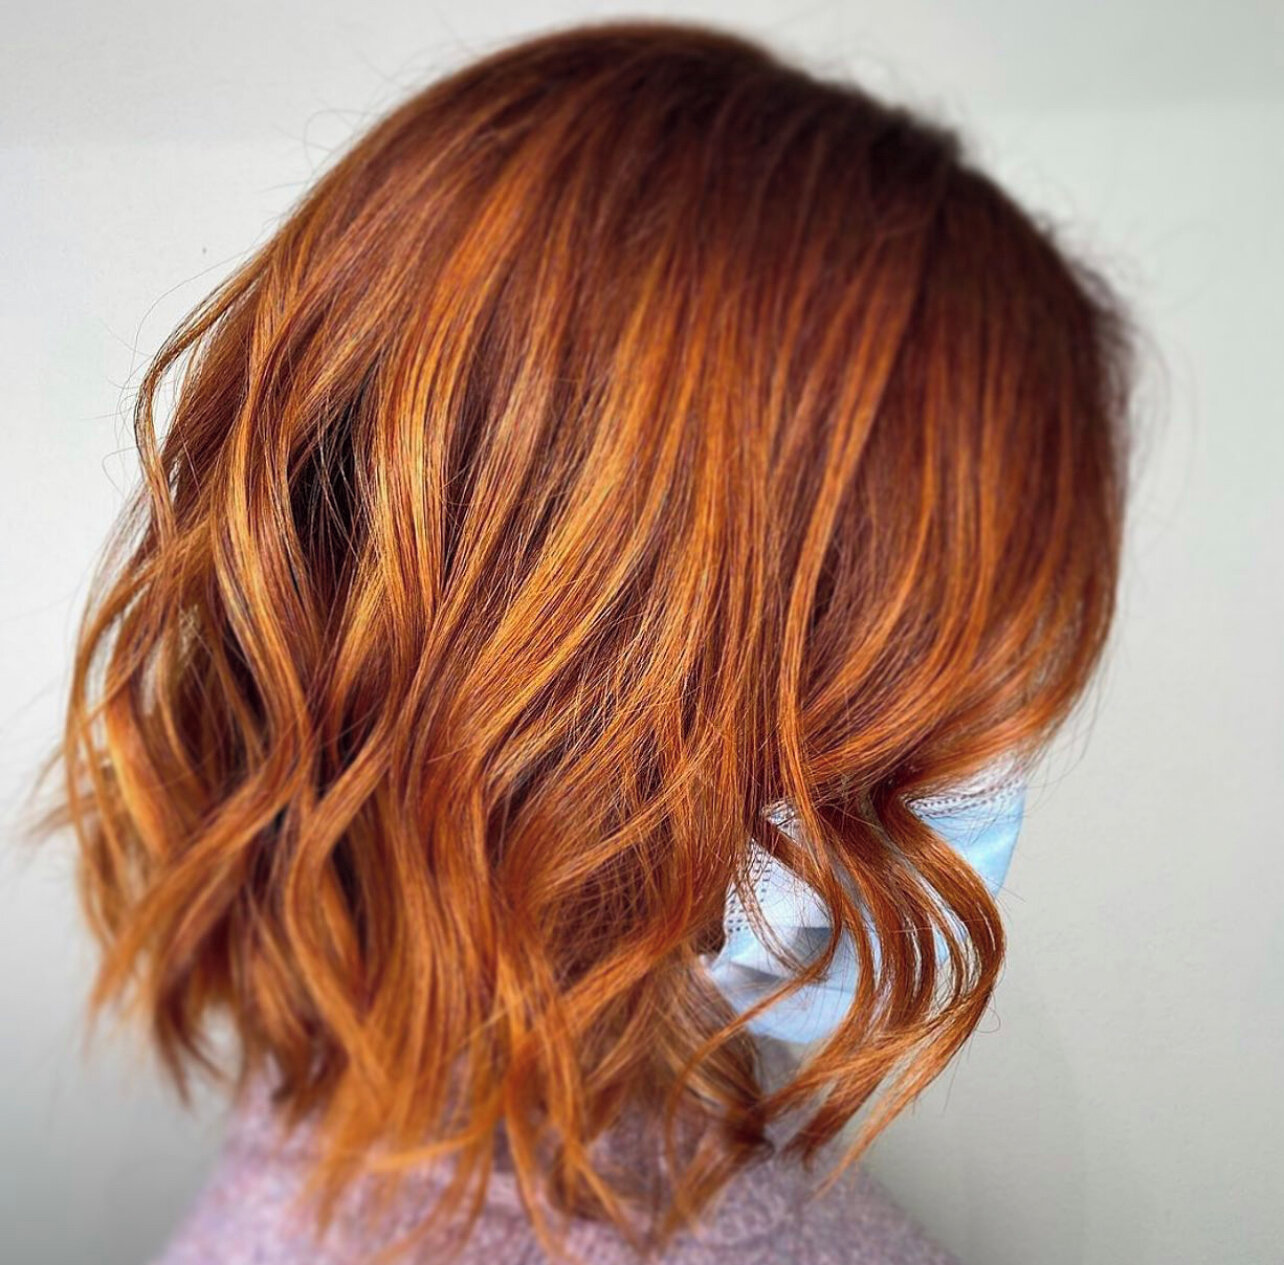 We wanted to highlight an extremely talented artist here at @lunaticfringeunionheights ➡ @hair_by_erin_r is one of the most genuine and fun people you could meet! Book with her today to look and feel good💛!⁣
≫ Monday 9-6⁣
≫ Tues-Friday 9-7⁣
≫ Sat-Su